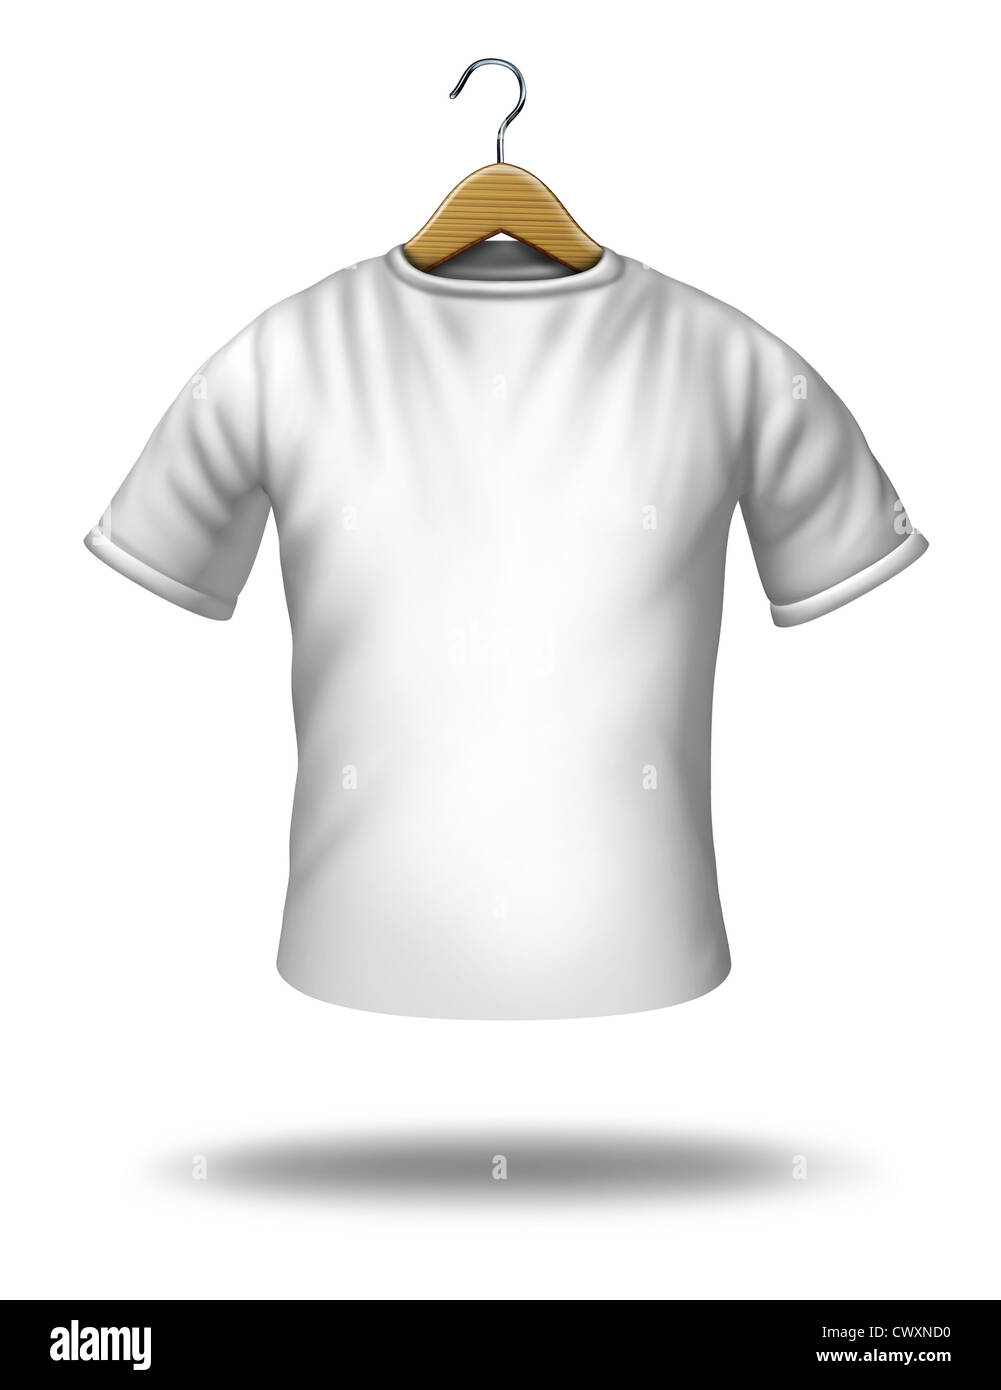 Clothing hanger on a white blank shirt or t-shirt hanging in the air as a symbol of merchandise and textile icon. Stock Photo